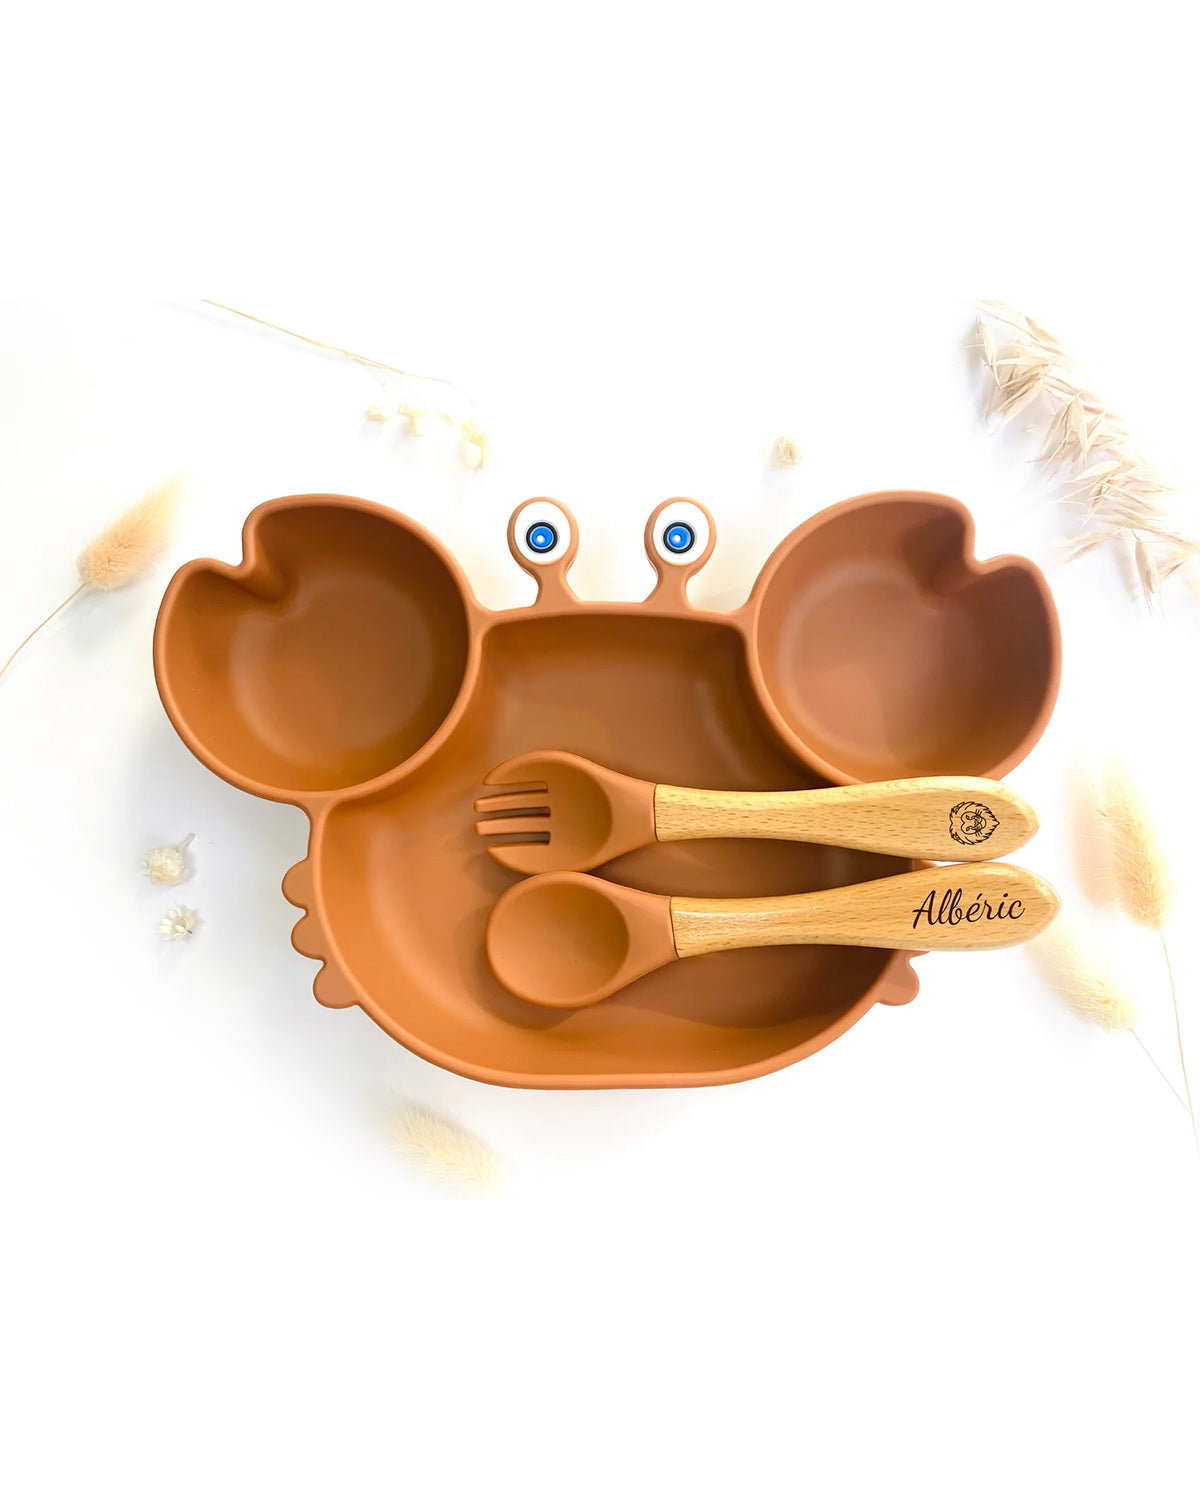 Crab-shaped Meal + Cutlery Set - Terra Cotta